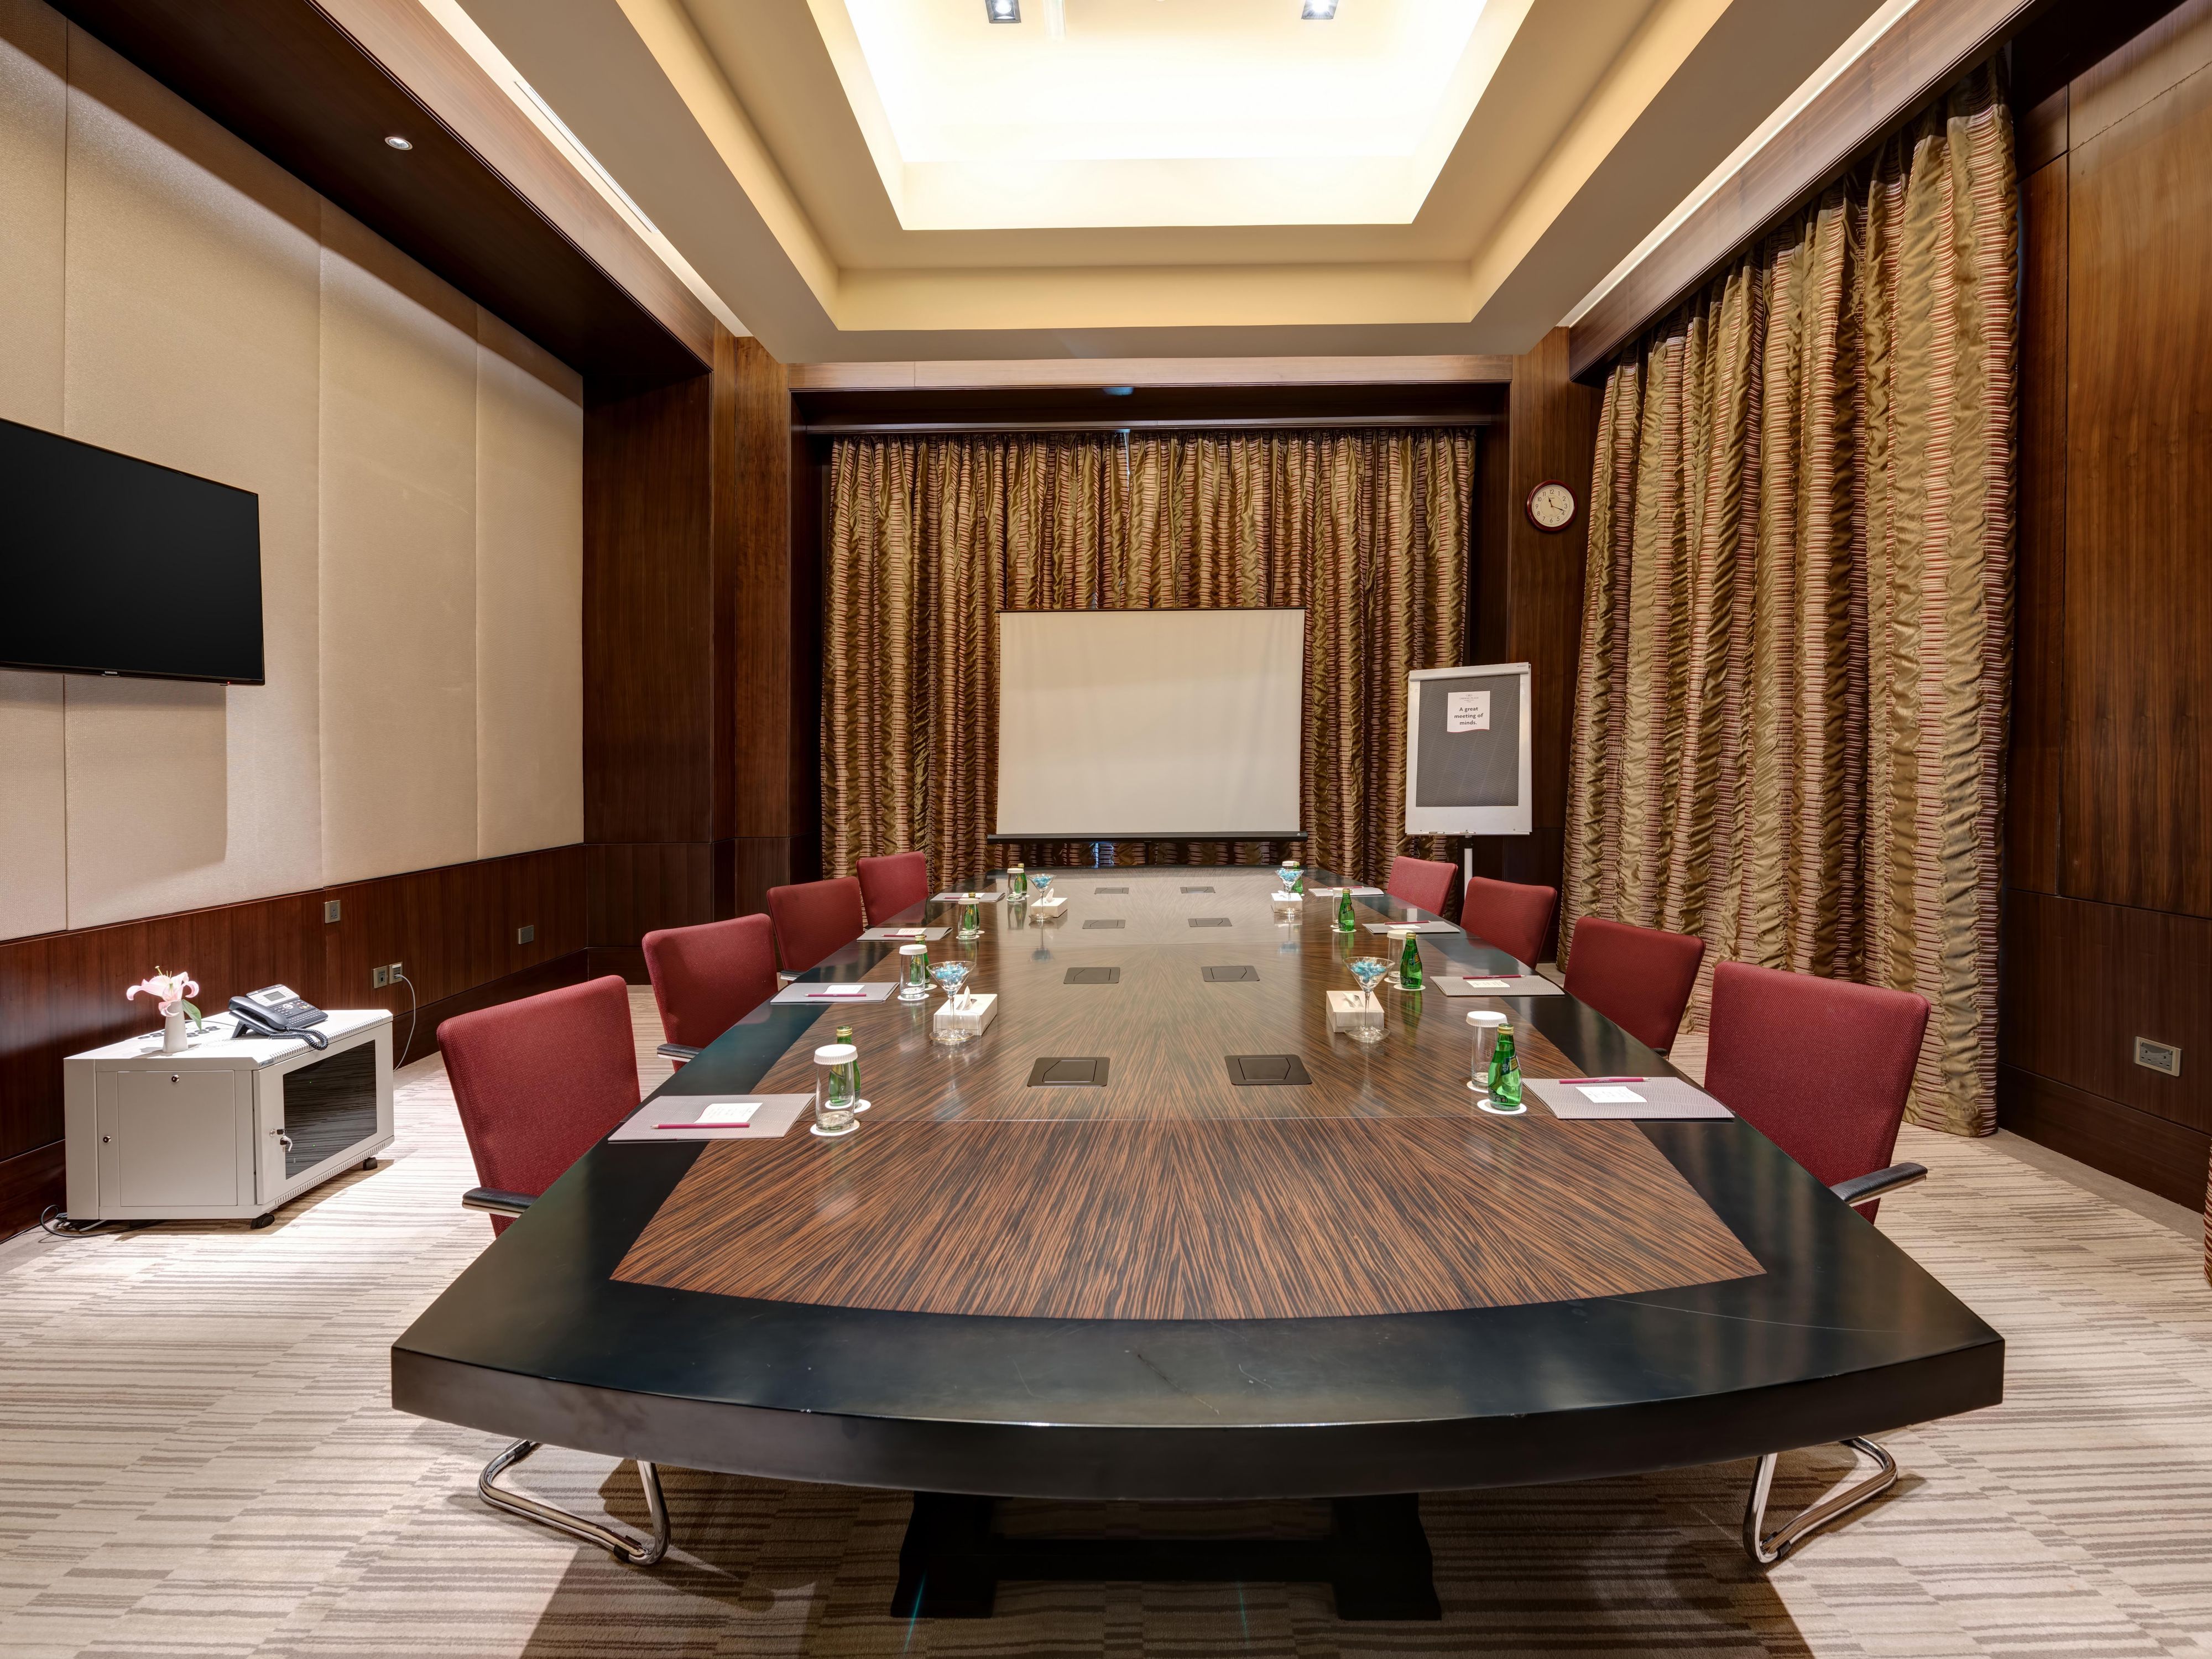 With four spacious meeting rooms across our property, the Crowne Plaza Duqm is where business and leisure meet in one location.